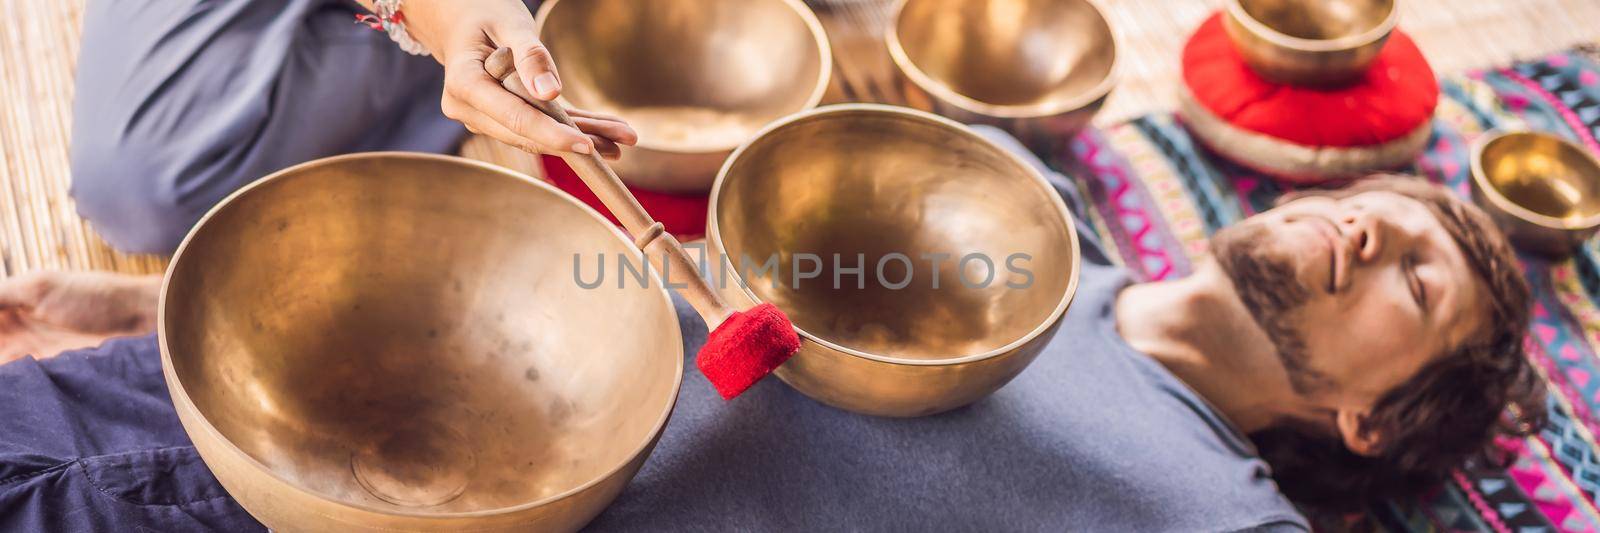 BANNER, LONG FORMAT Nepal Buddha copper singing bowl at spa salon. Young beautiful man doing massage therapy singing bowls in the Spa against a waterfall. Sound therapy, recreation, meditation, healthy lifestyle and body care concept by galitskaya